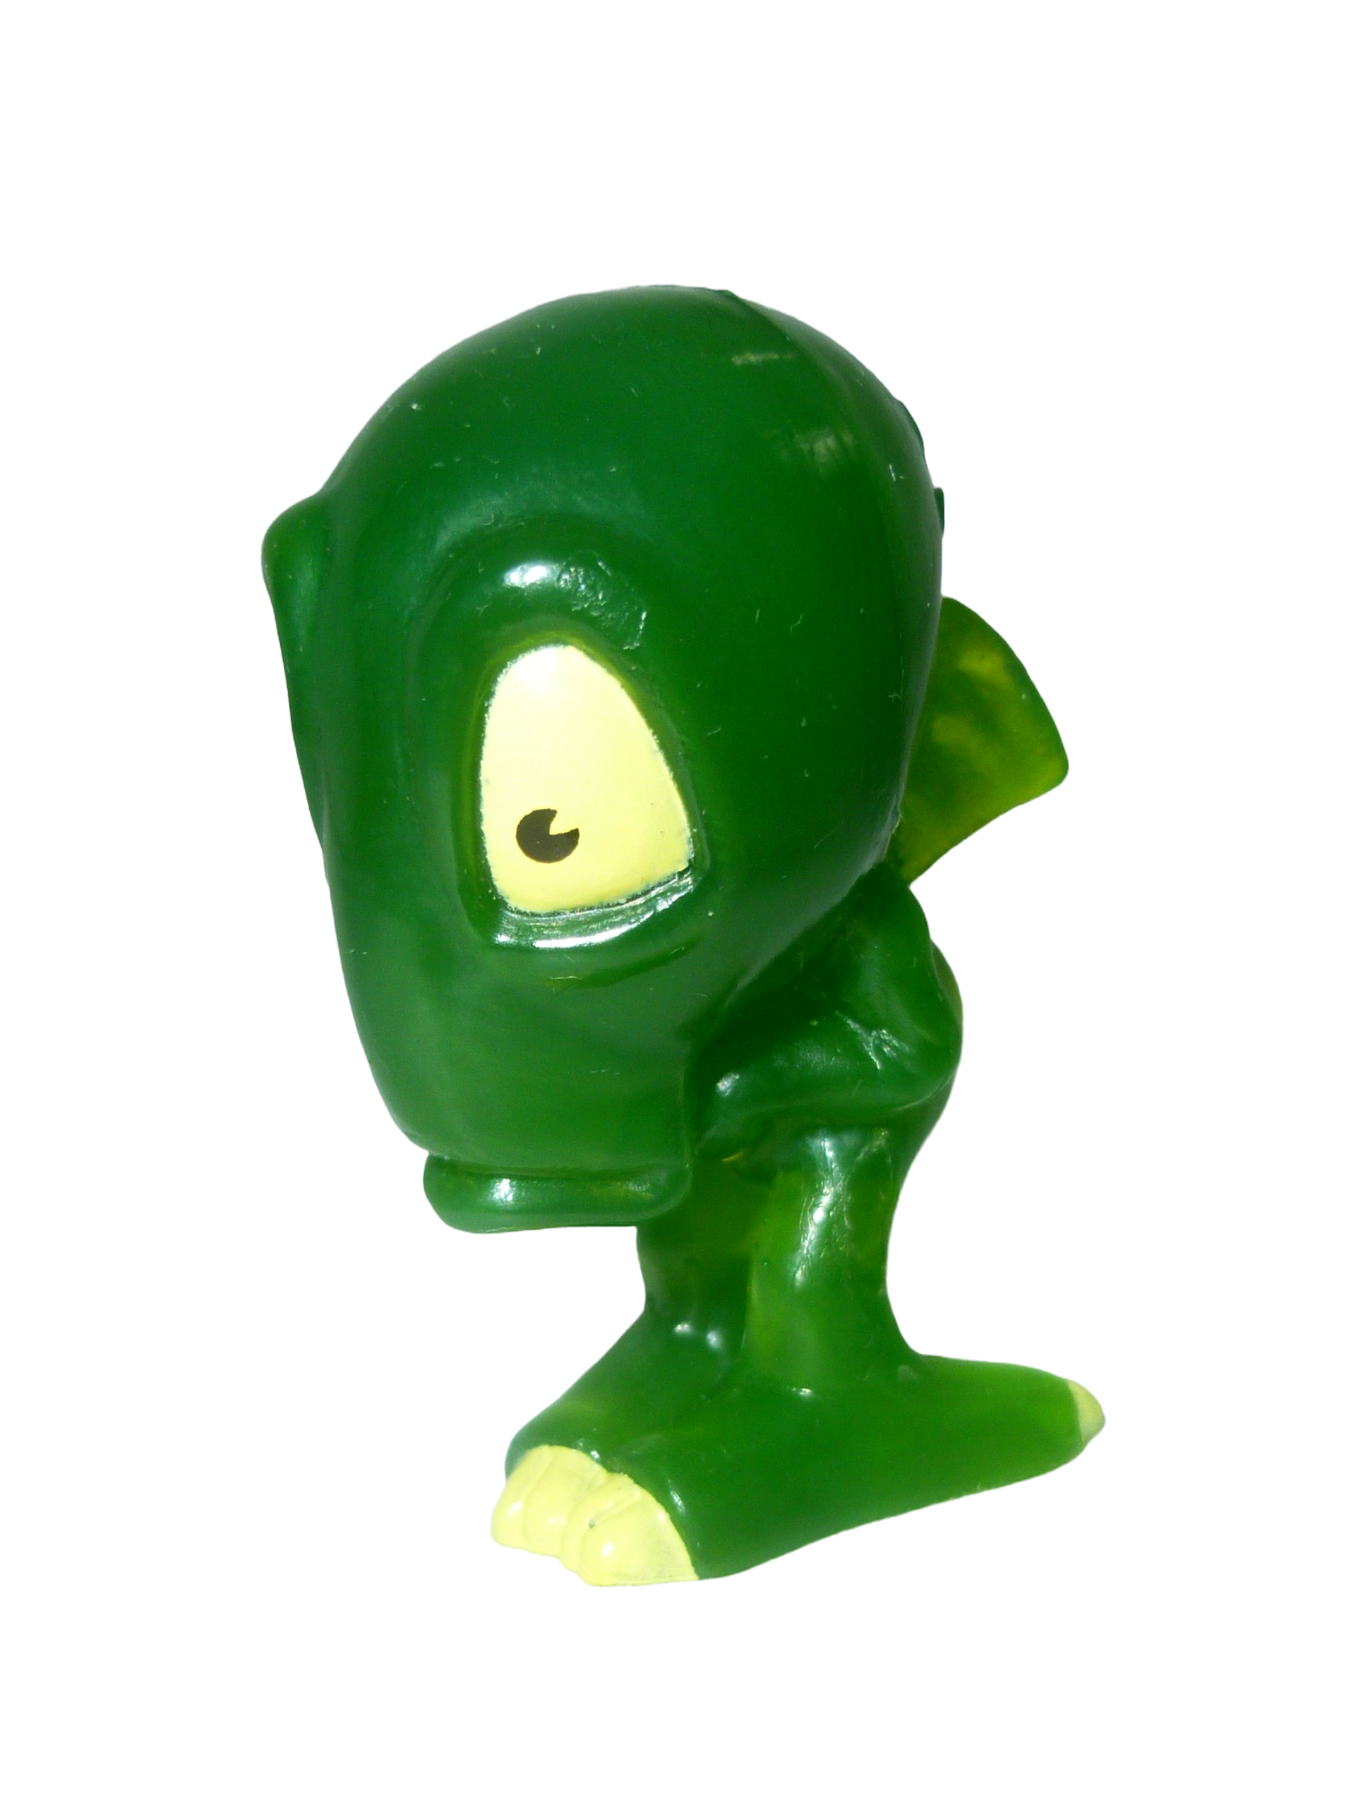 Milma bat - green transparent monster collectible figure Synapse 2011